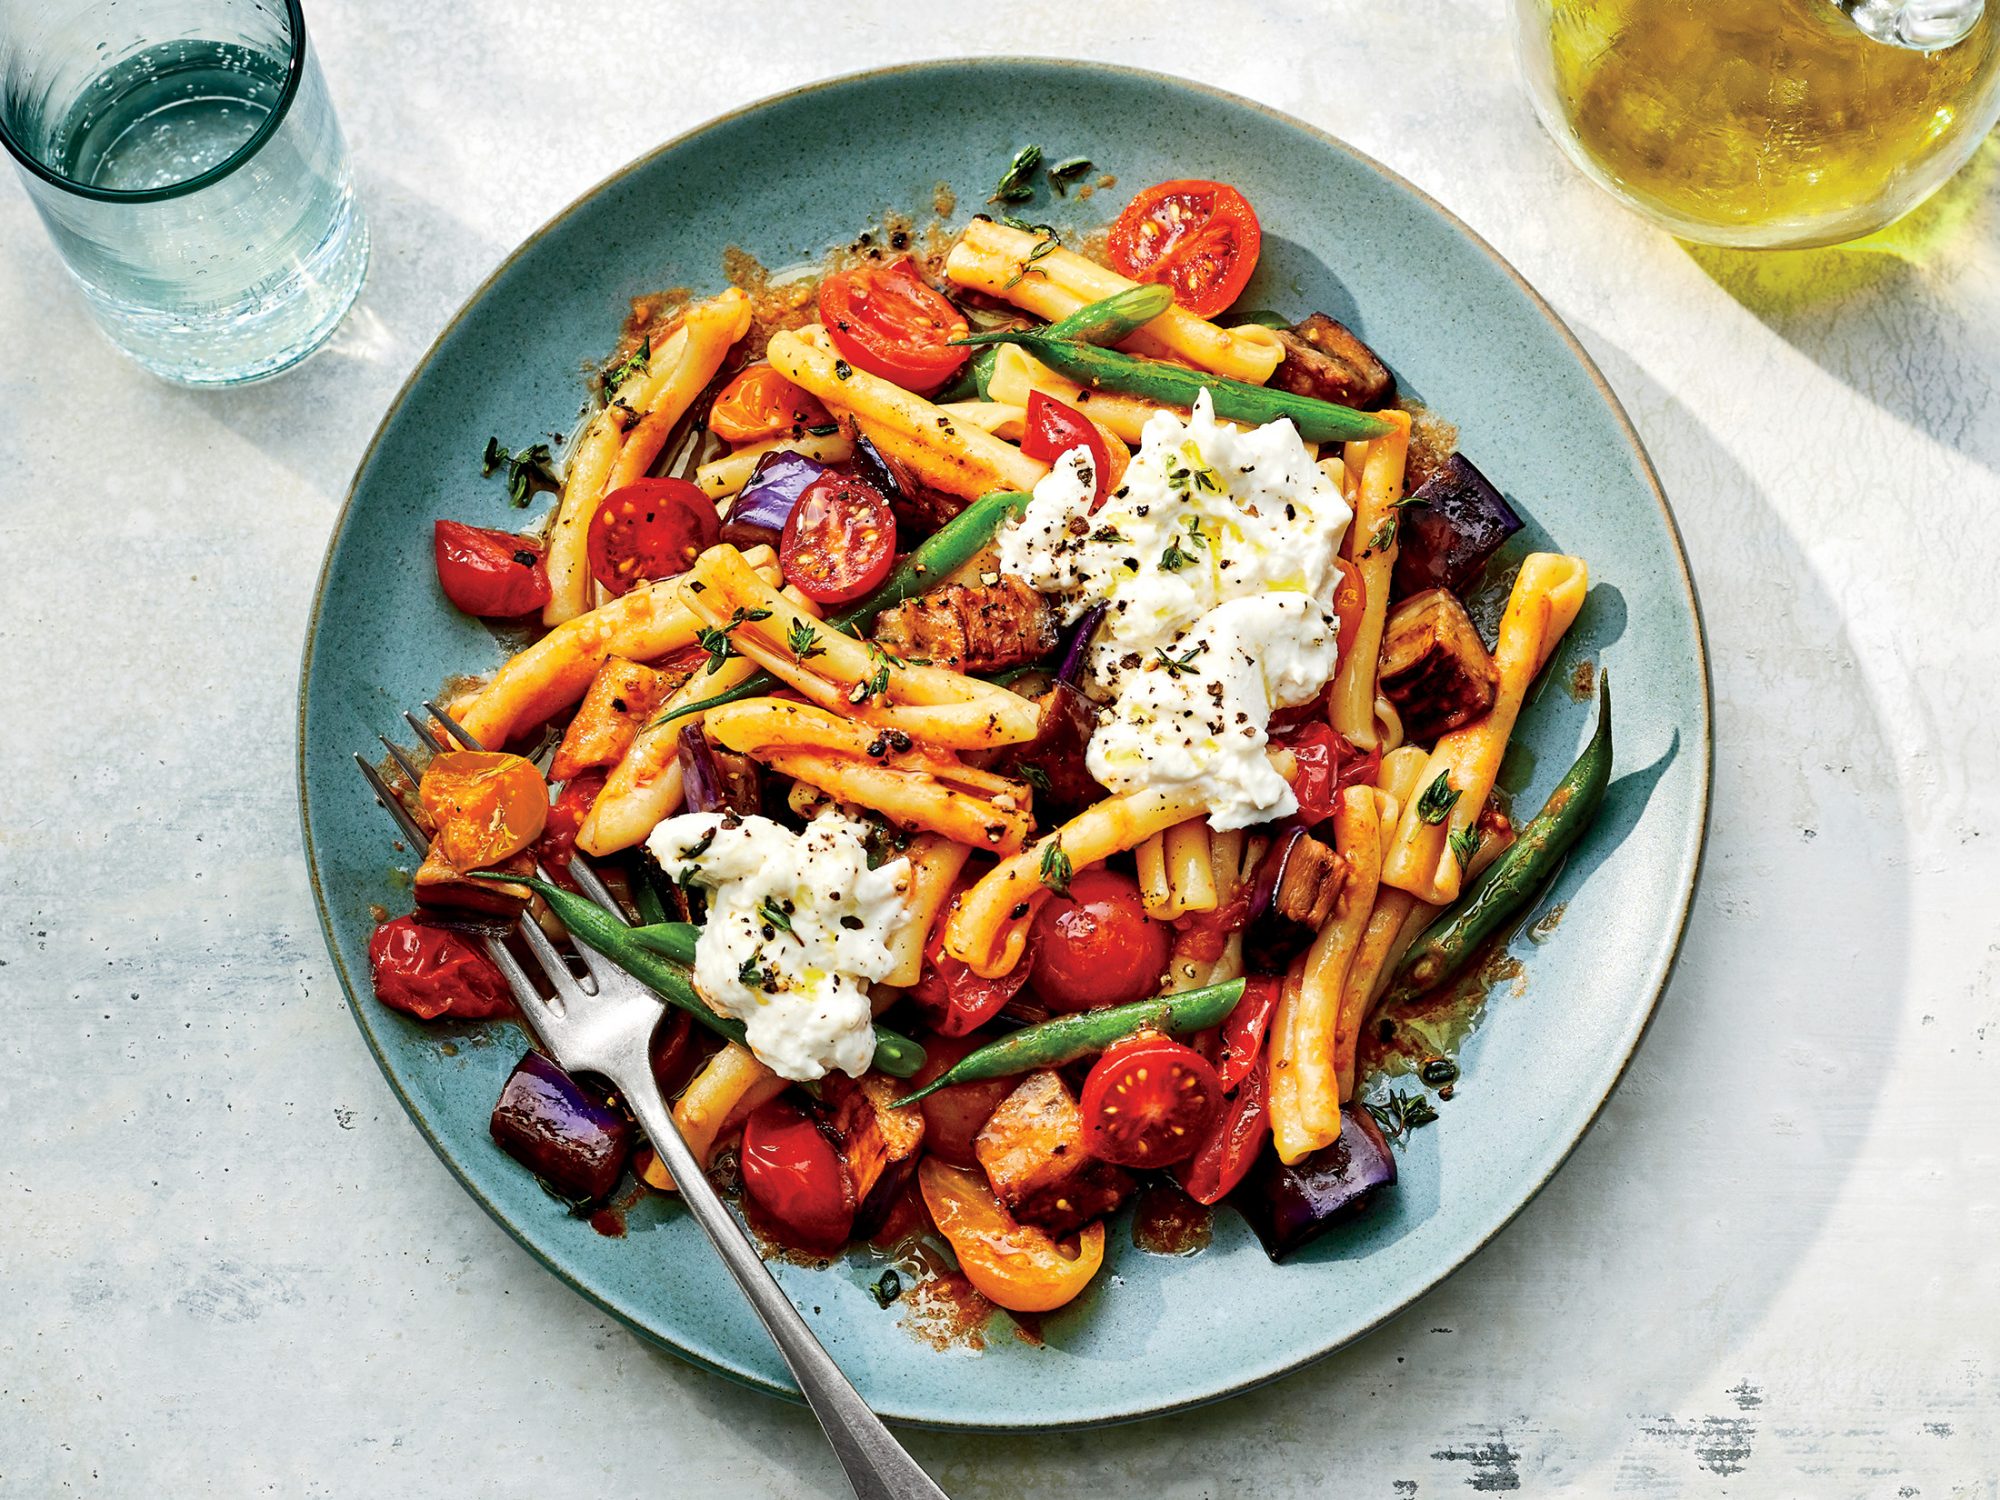 Warm Pasta Salad with Tomatoes and Eggplant